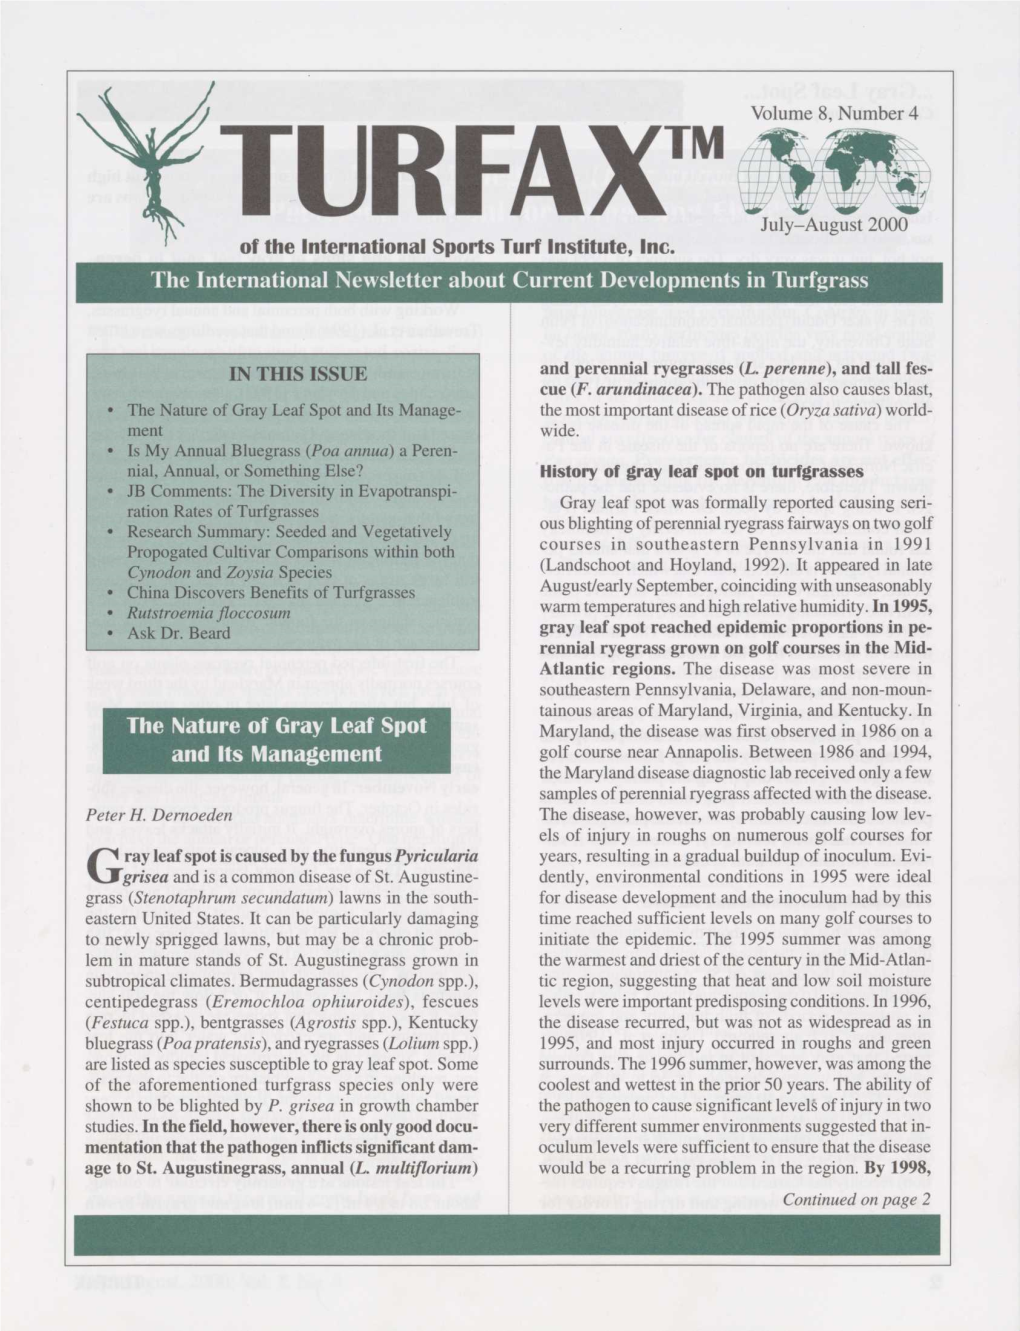 Of the International Sports Turf Institute, Inc. the International Newsletter About Current Developments in Turfgrass